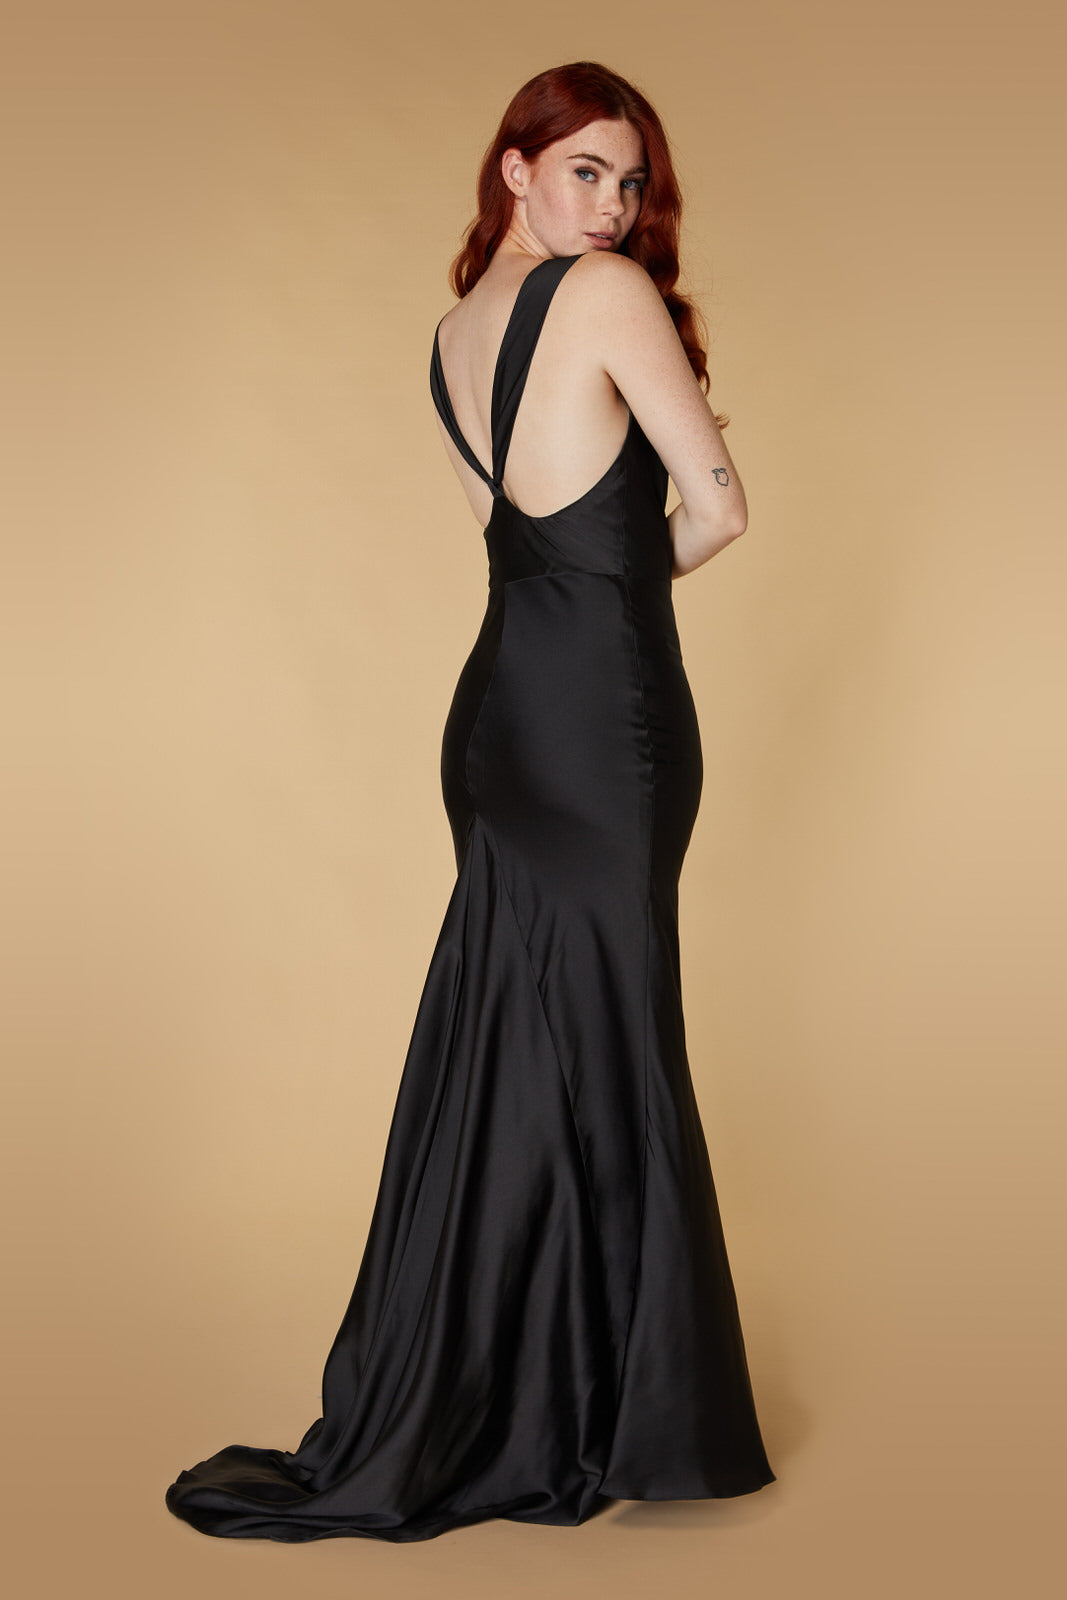 Mika Cowl Front Maxi Dress With Strappy Back Detail, UK 6 / US 2 / EU 34 / Black